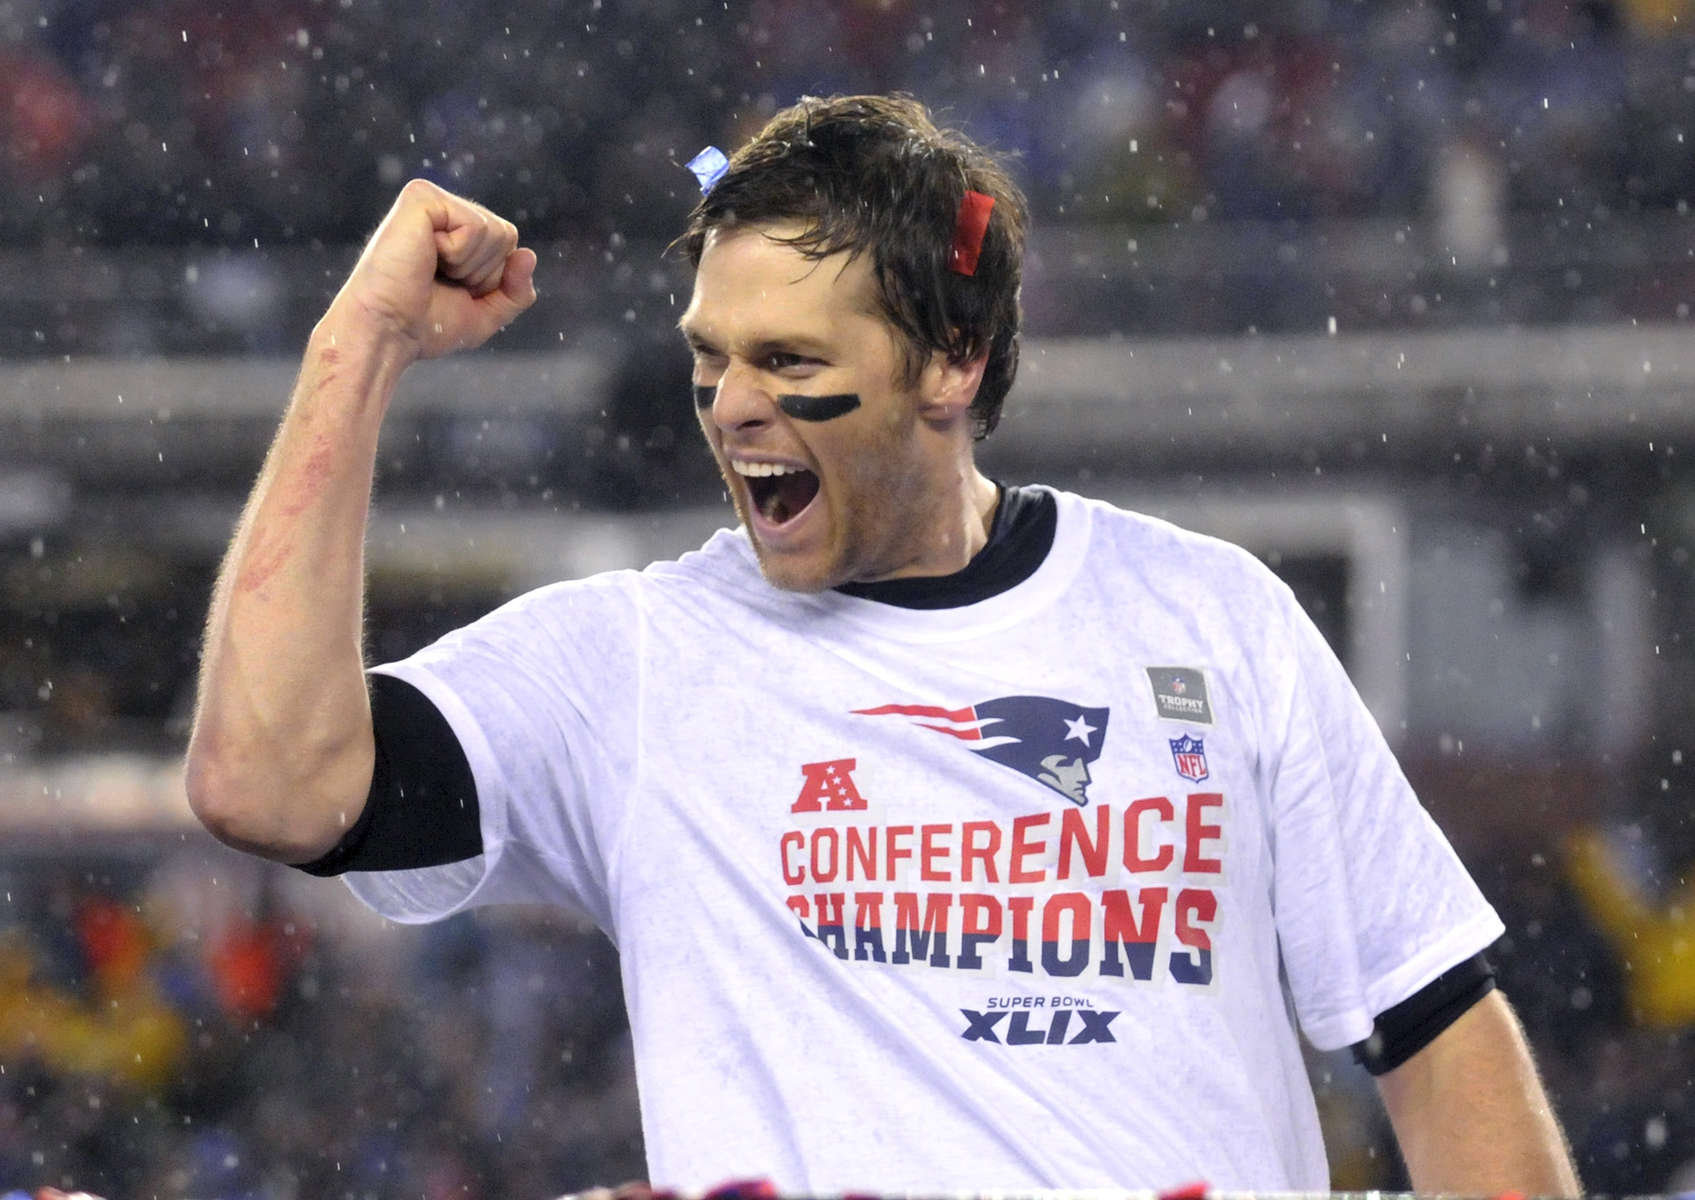 New England Patriots quarterback Tom Brady celebrates an AFC Championship victory over the Indianapolis Colts in the game that would be known for {quote}Deflate Gate.{quote}